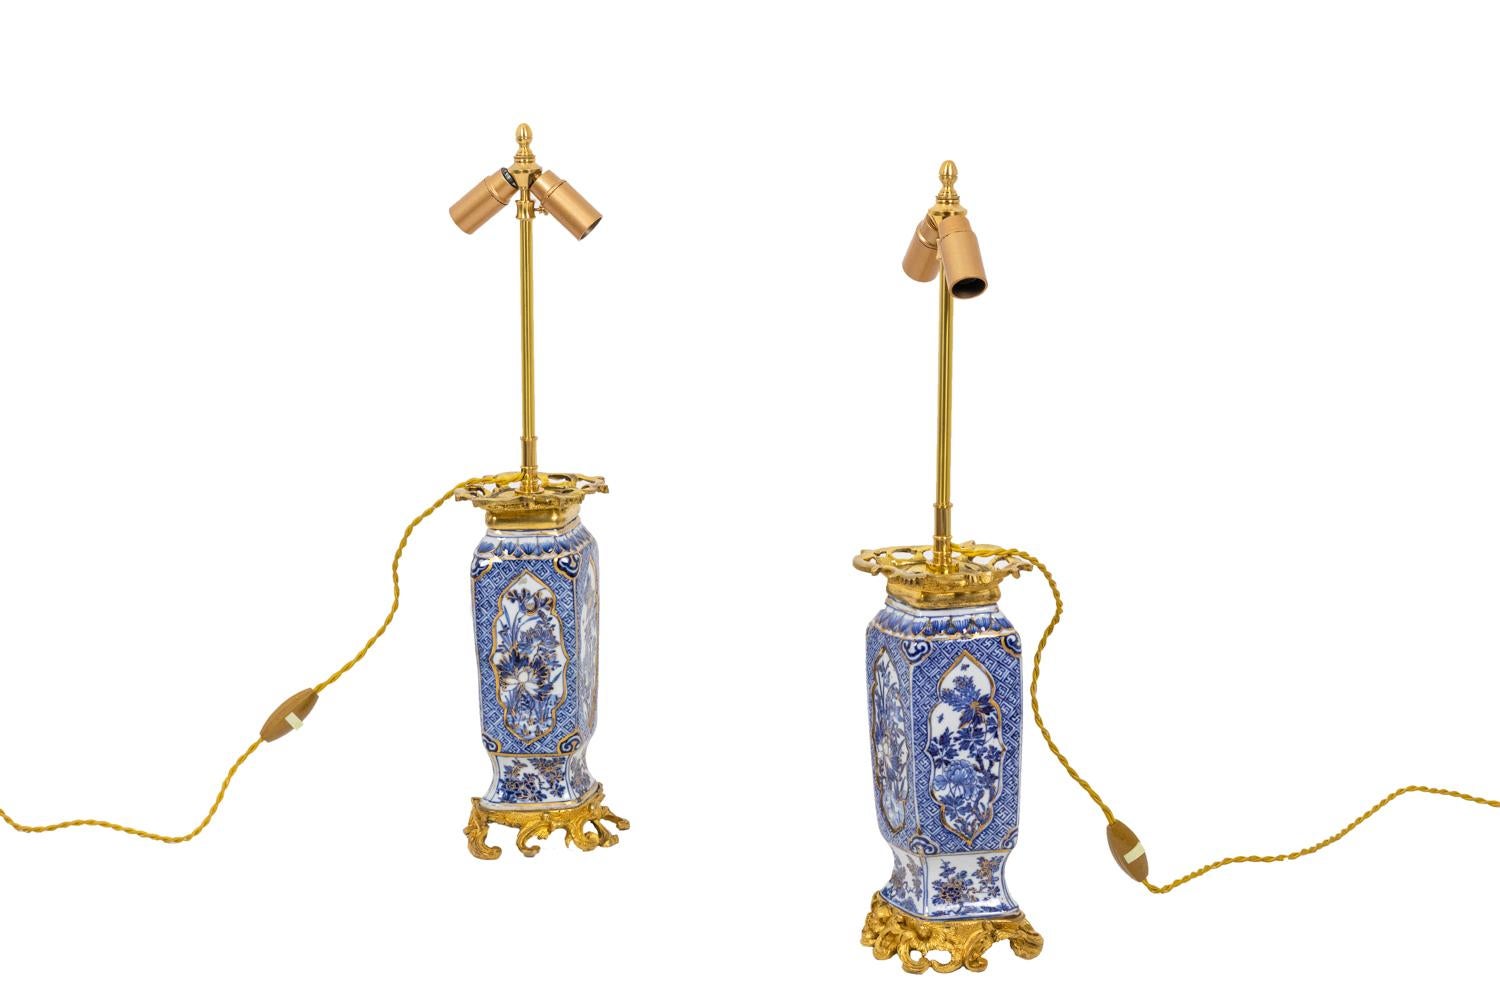 Pair of parallelepiped lamps in blue white porcelain. Decor of gilt cartouche framing flowers like chrysanthemums, cherry blossoms, peonies, etc. on a svastika background on a checkerboard pattern and angles decorated with ruyi. They are framed with